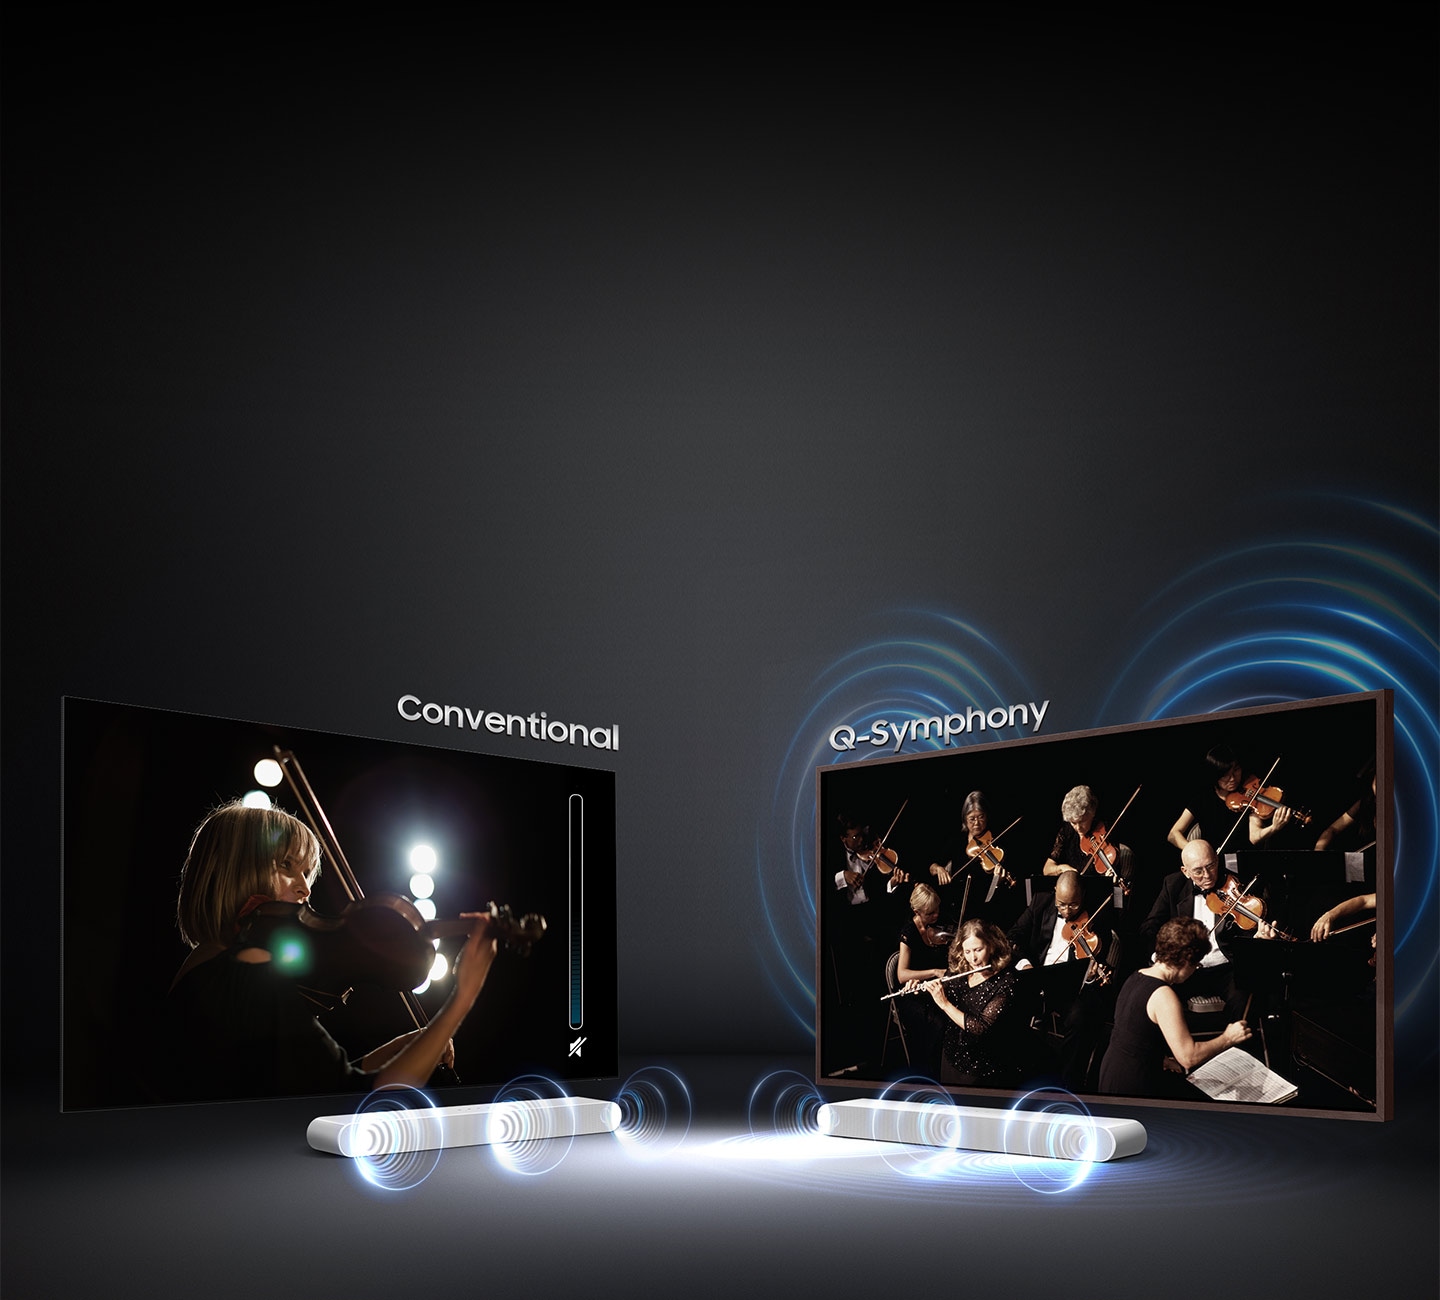 Sound wave graphics from only soundbar demonstrate conventional sound experience.On the other hand, sound wave graphics from TV speaker and soundbar show that Q Symphony allows sound to be heard simultaneously from TV speaker and soundbar.